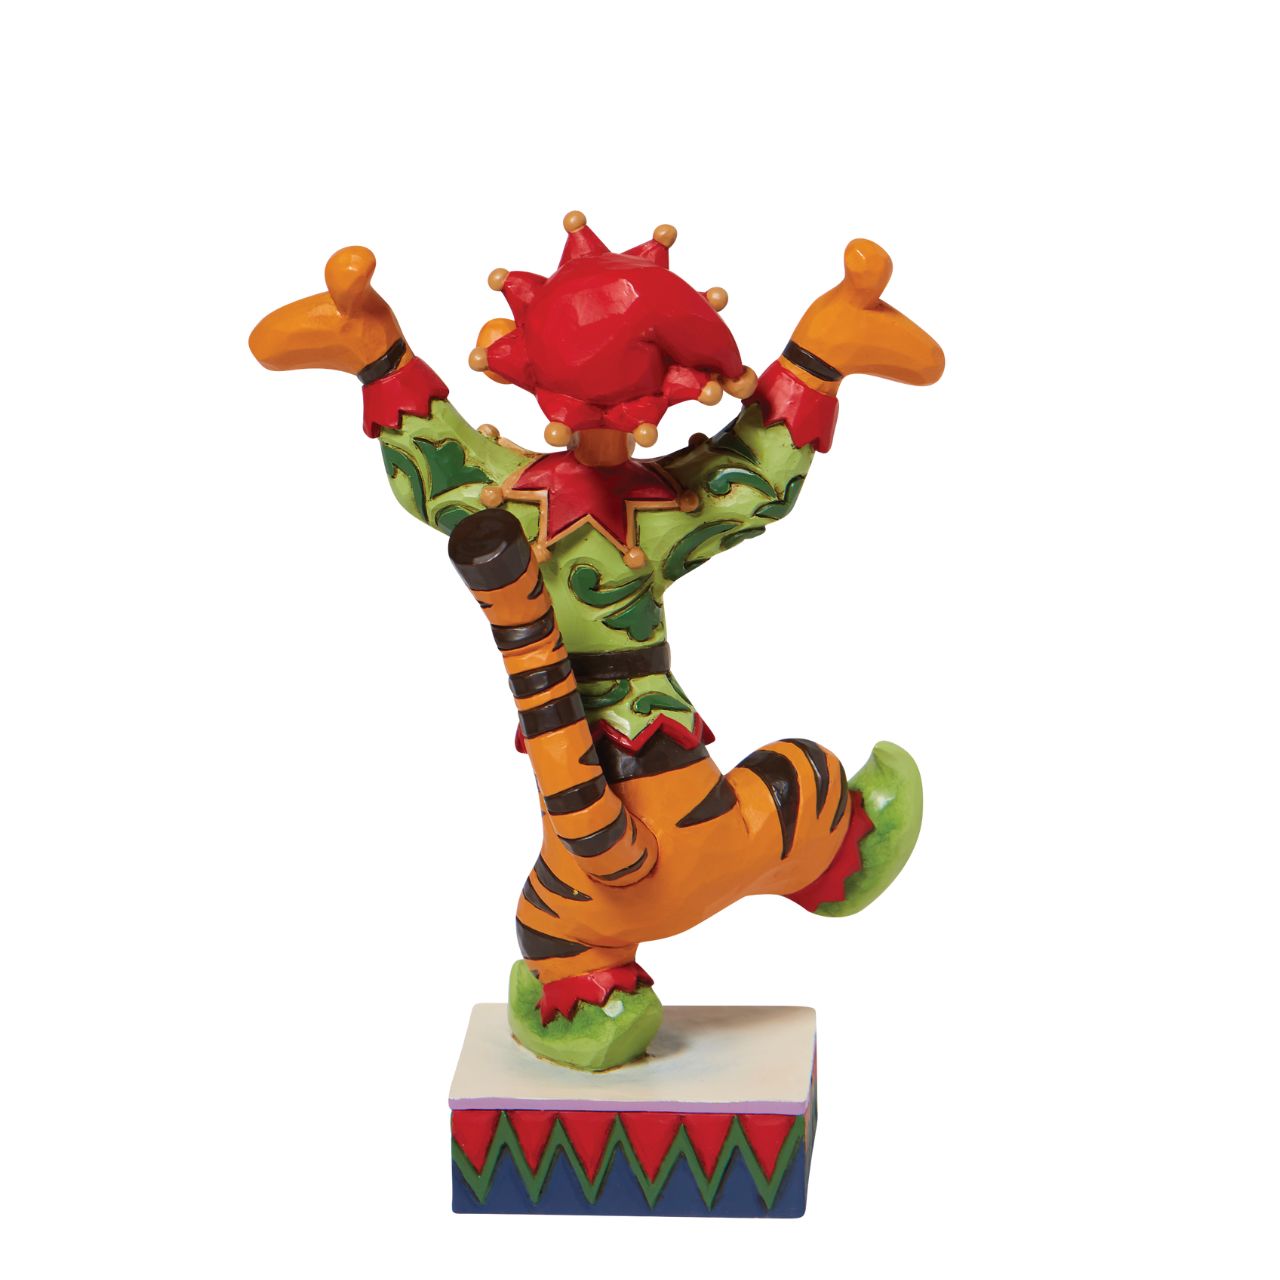 Ecstatic Elf Tigger Elf Figurine by Jim Shore  It's the most wonderful time of the year, and Tigger is ready to tell you the most wonderful thing about everything this holiday season. Jubilant and jolly the striped jester wears an elf costume with a broad smile in this Disney by Jim Shore classic.